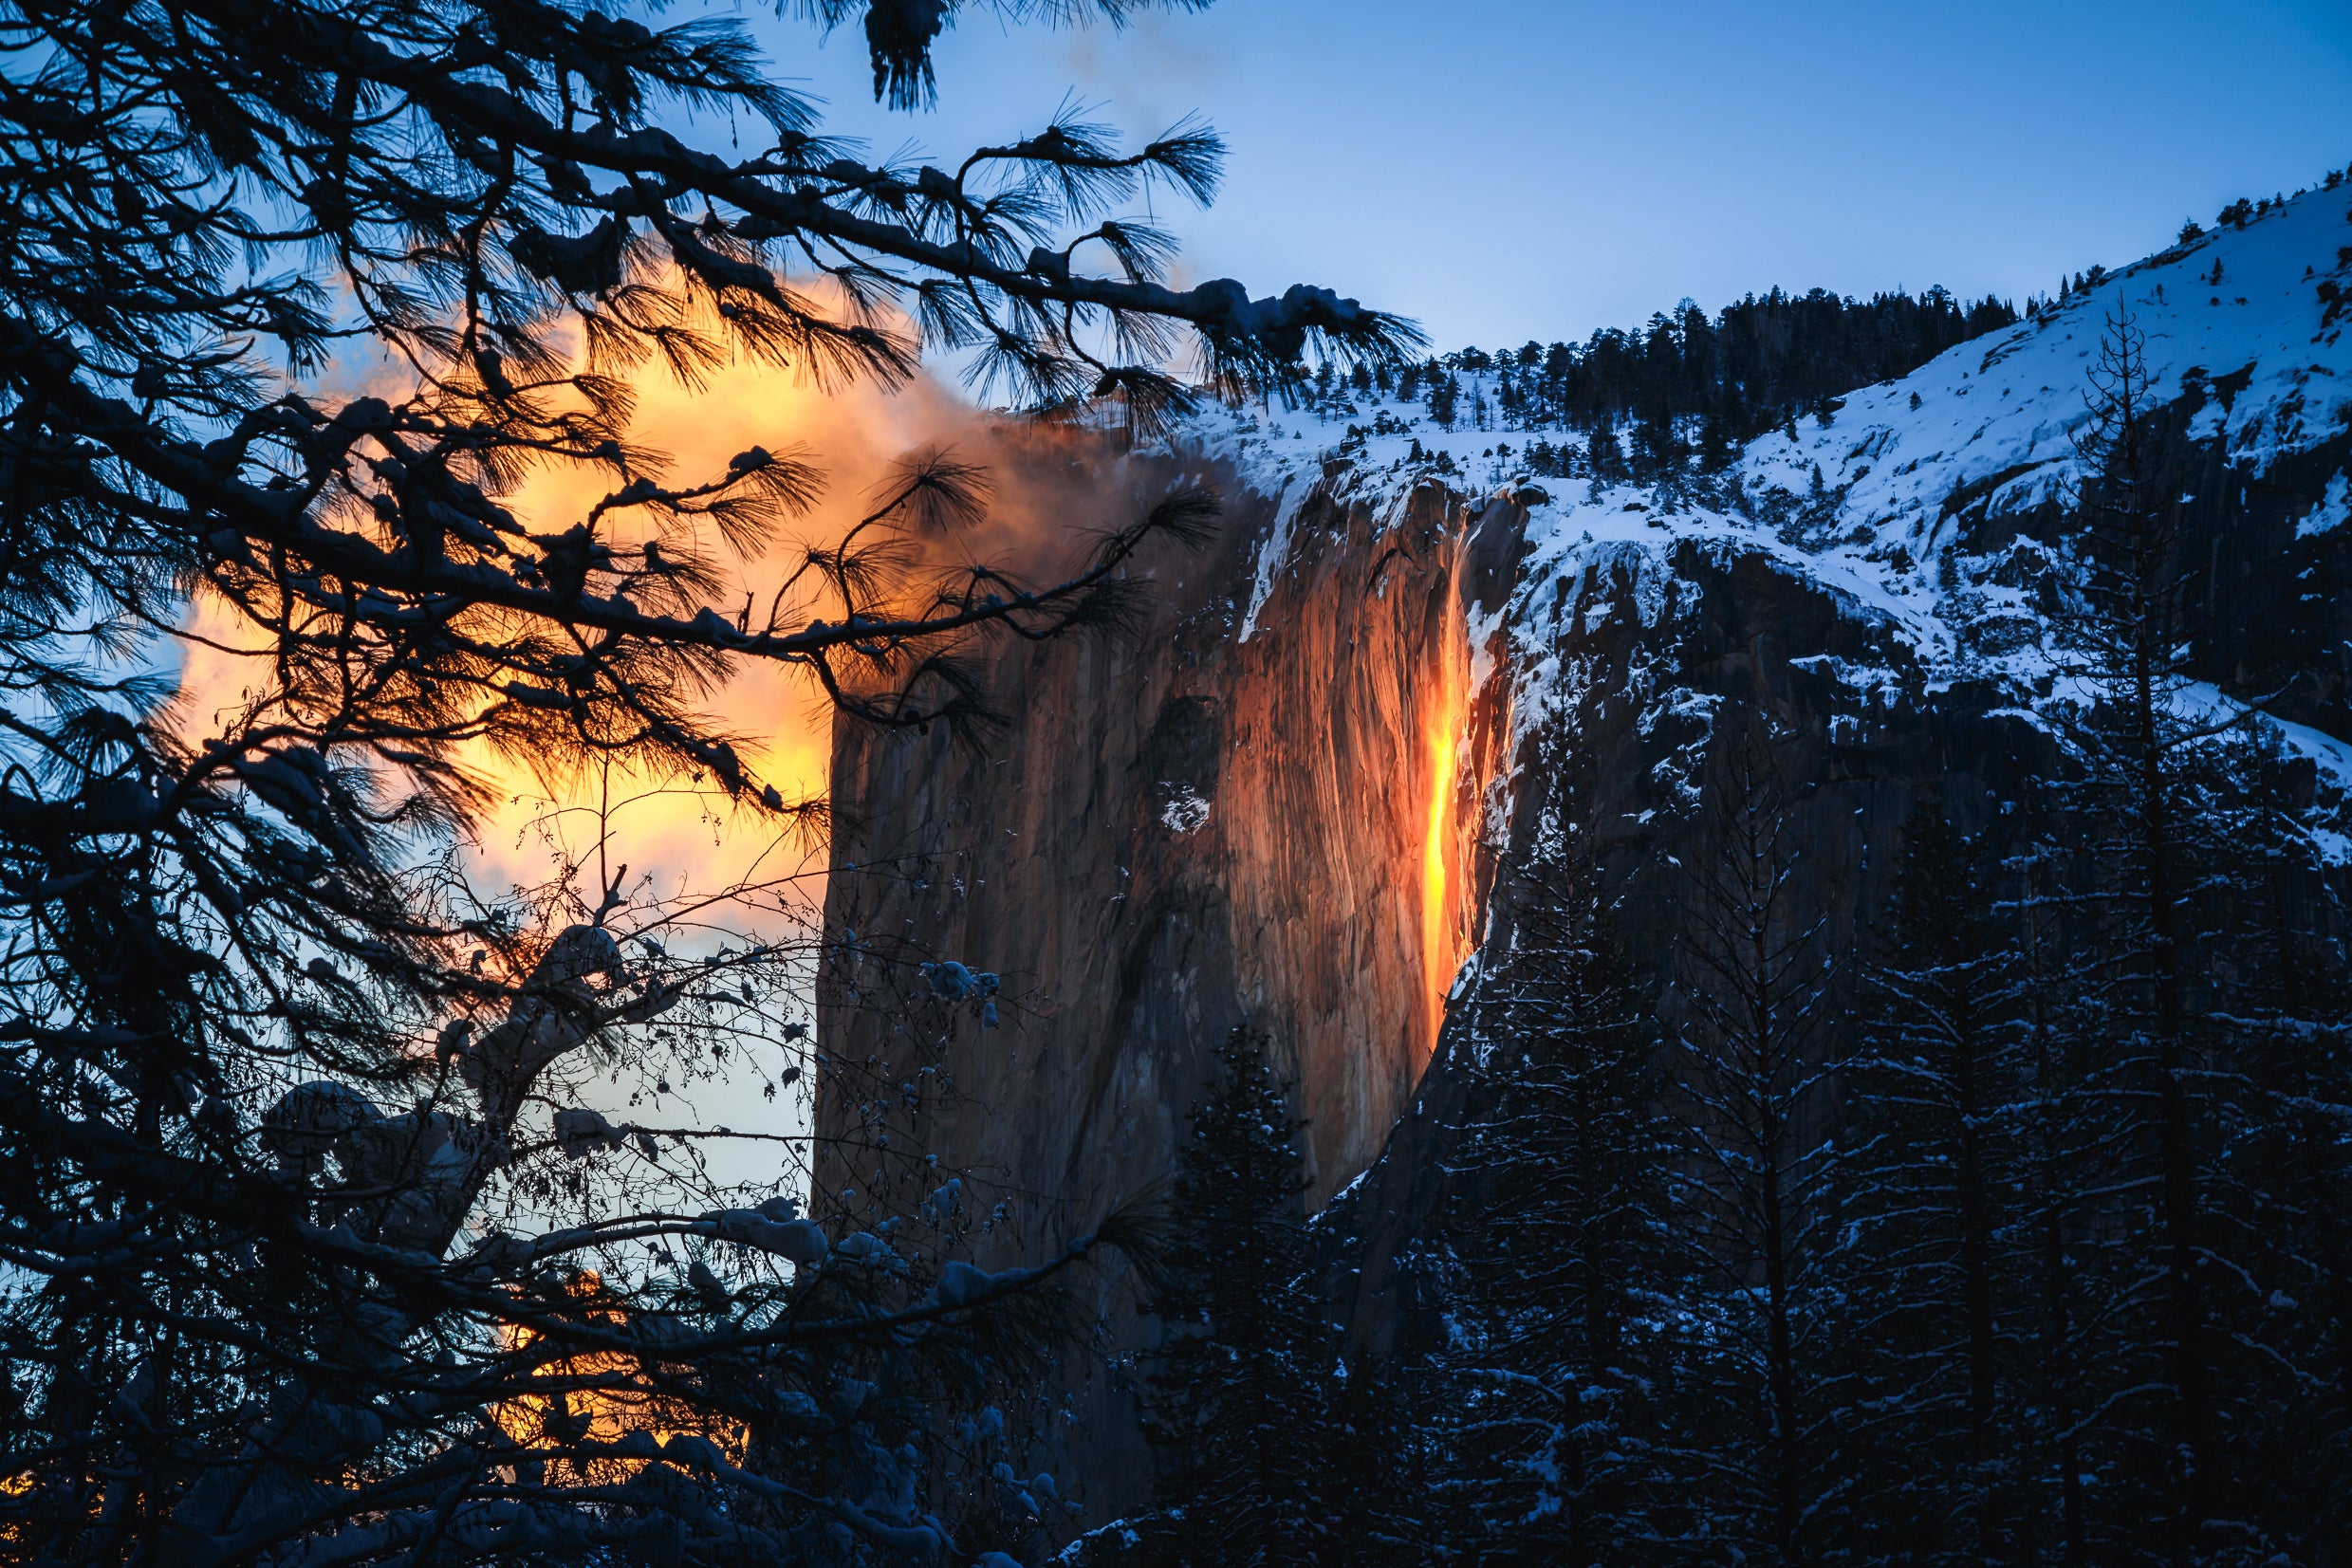 Firefall is back How and where to see Yosemite’s breathtaking natural